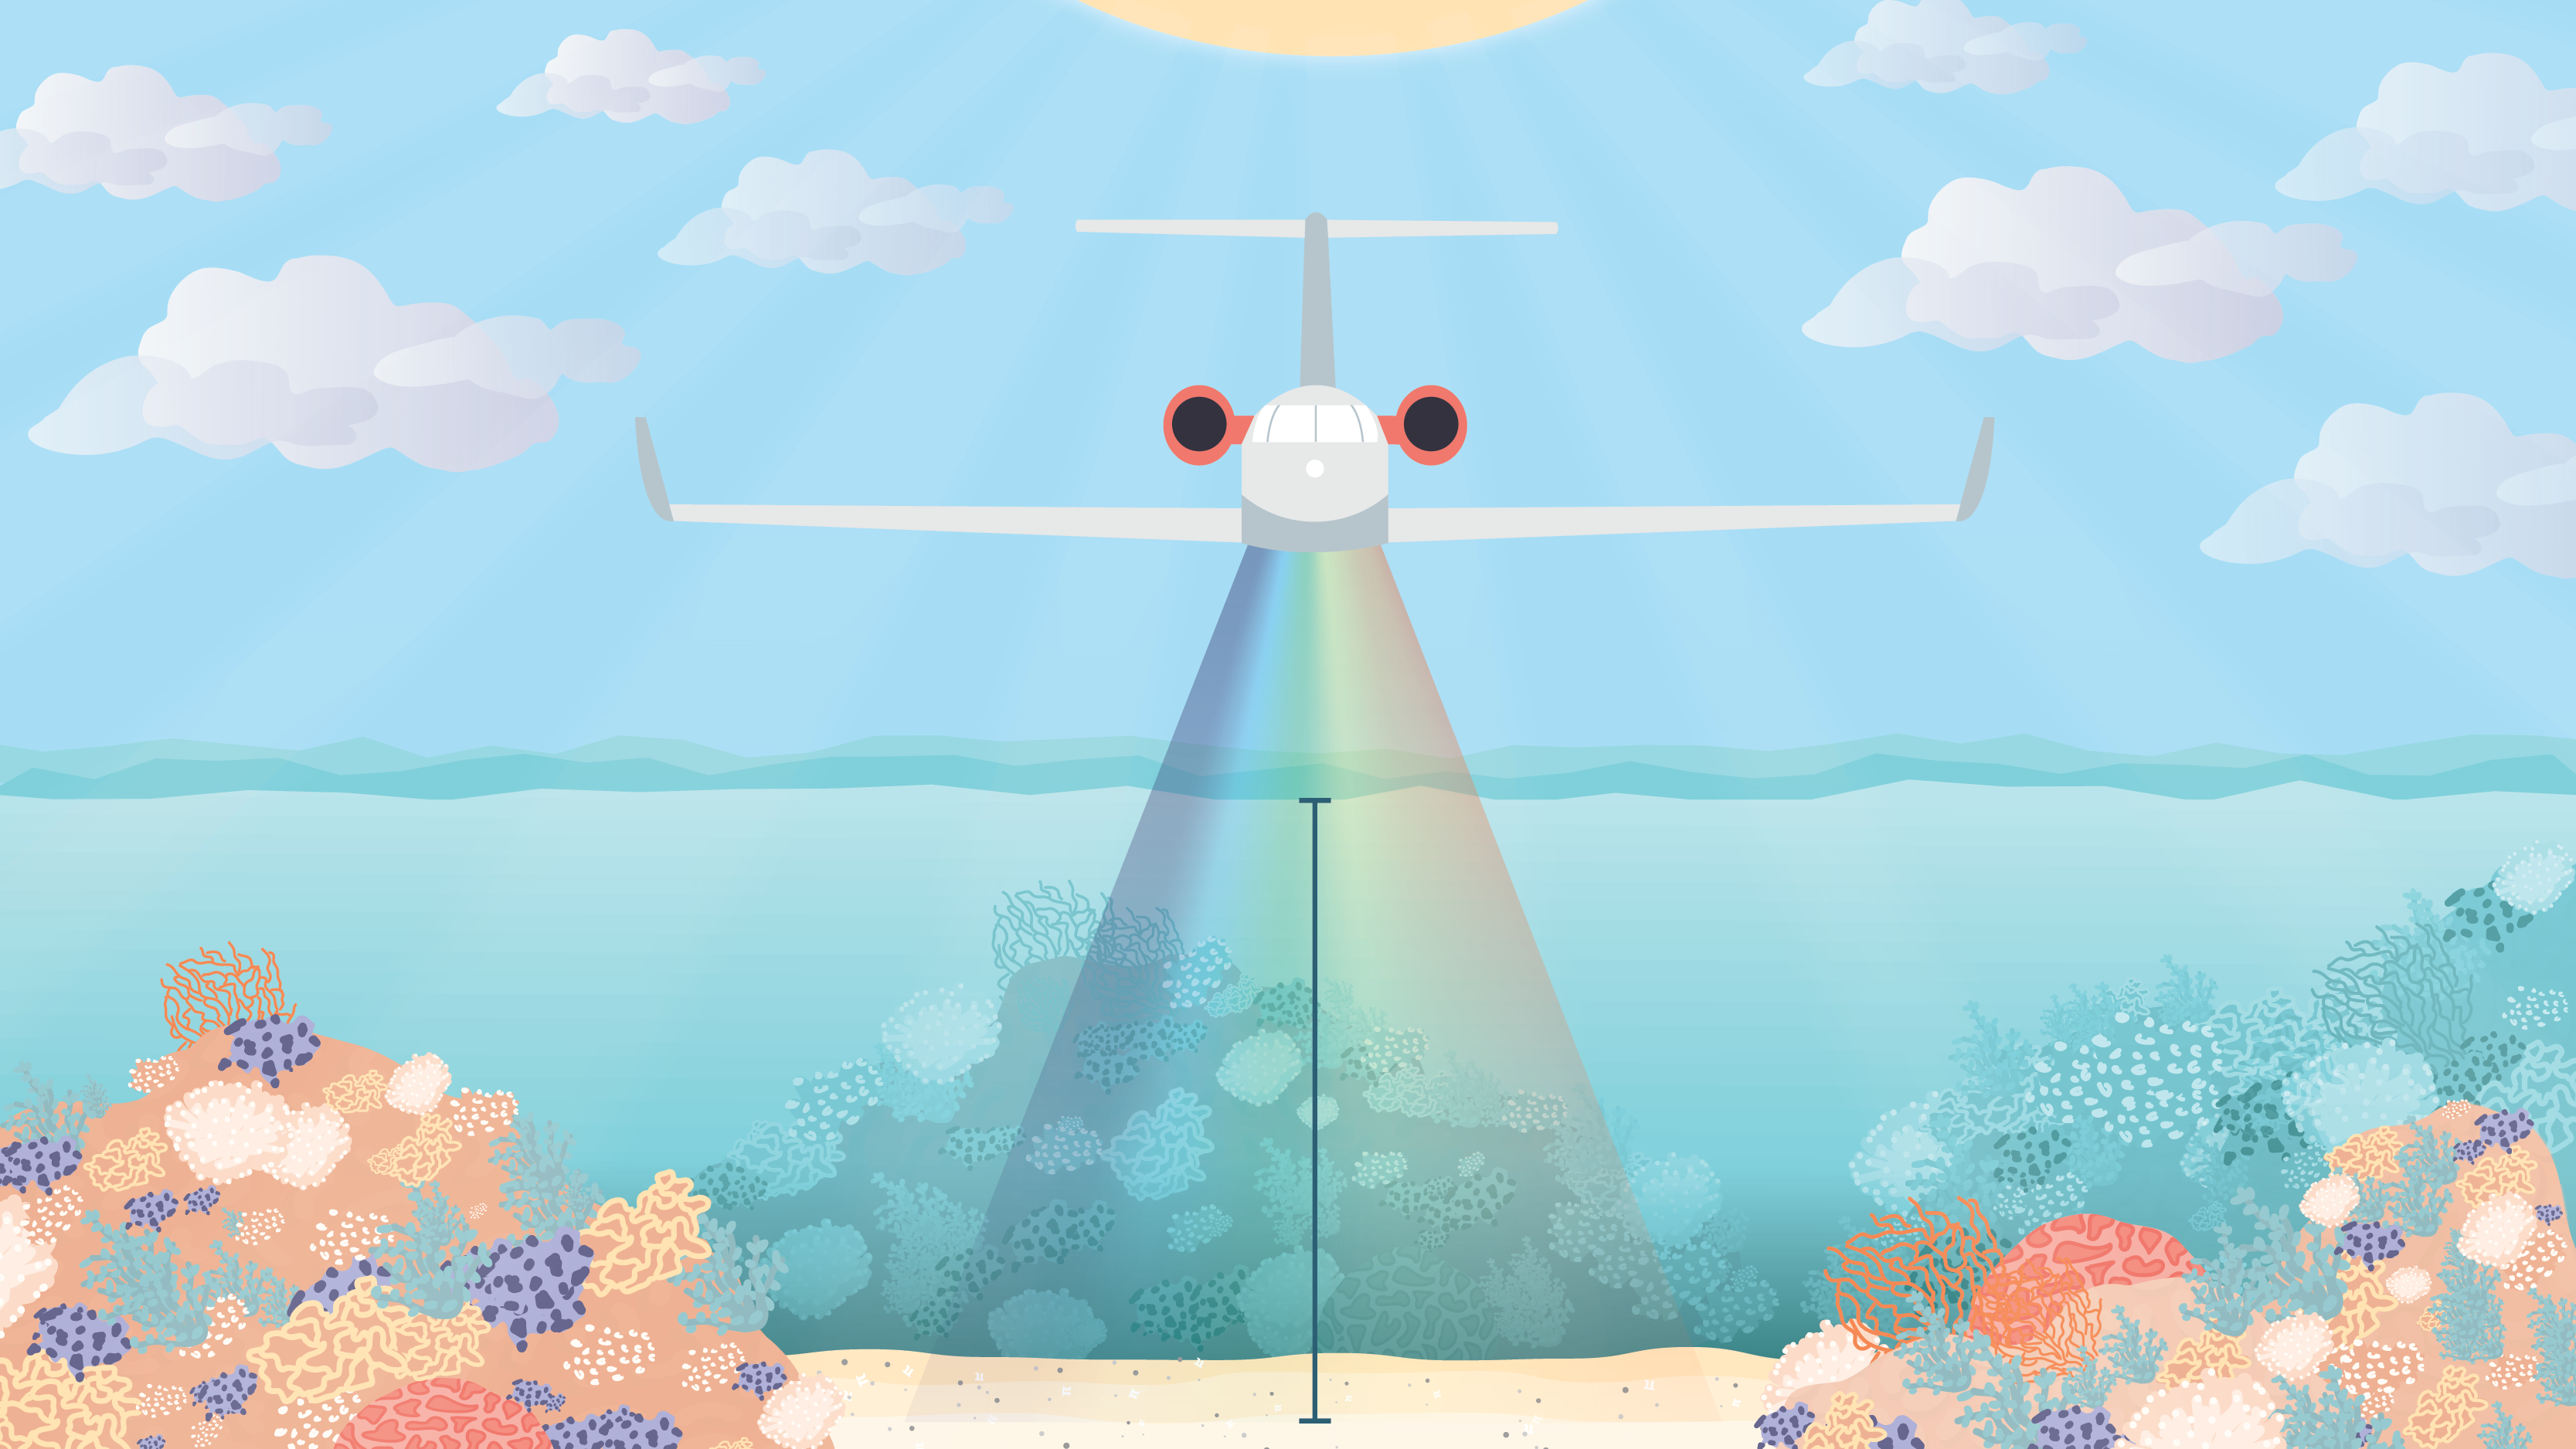 Illustration of an airplane flying over the ocean with coral shown below the water's surface. A spectral ray expands from the airplane down to the ocean floor